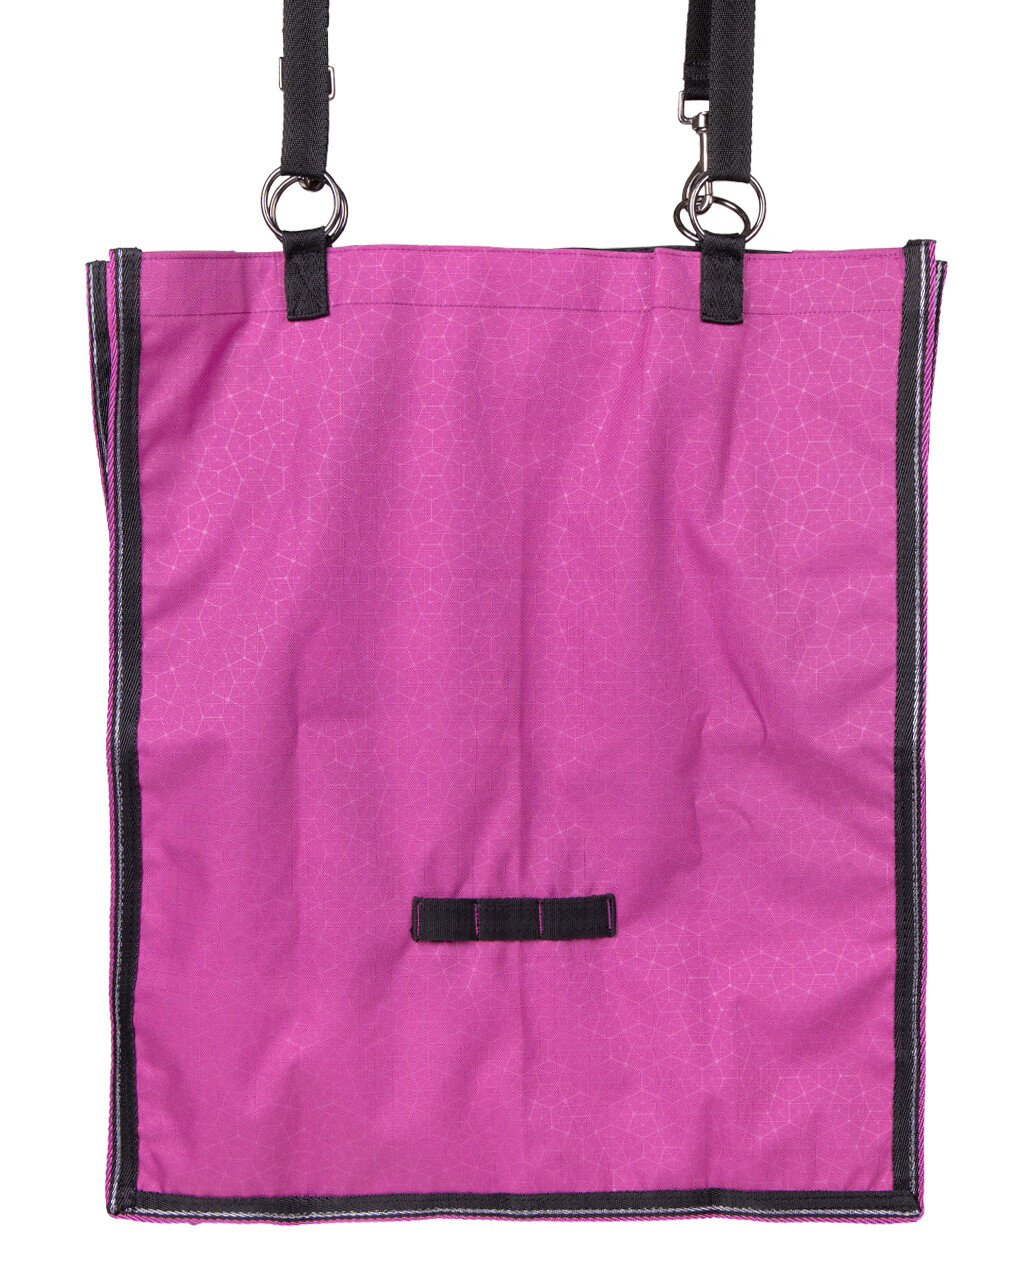 Haybag Collection, stirrup